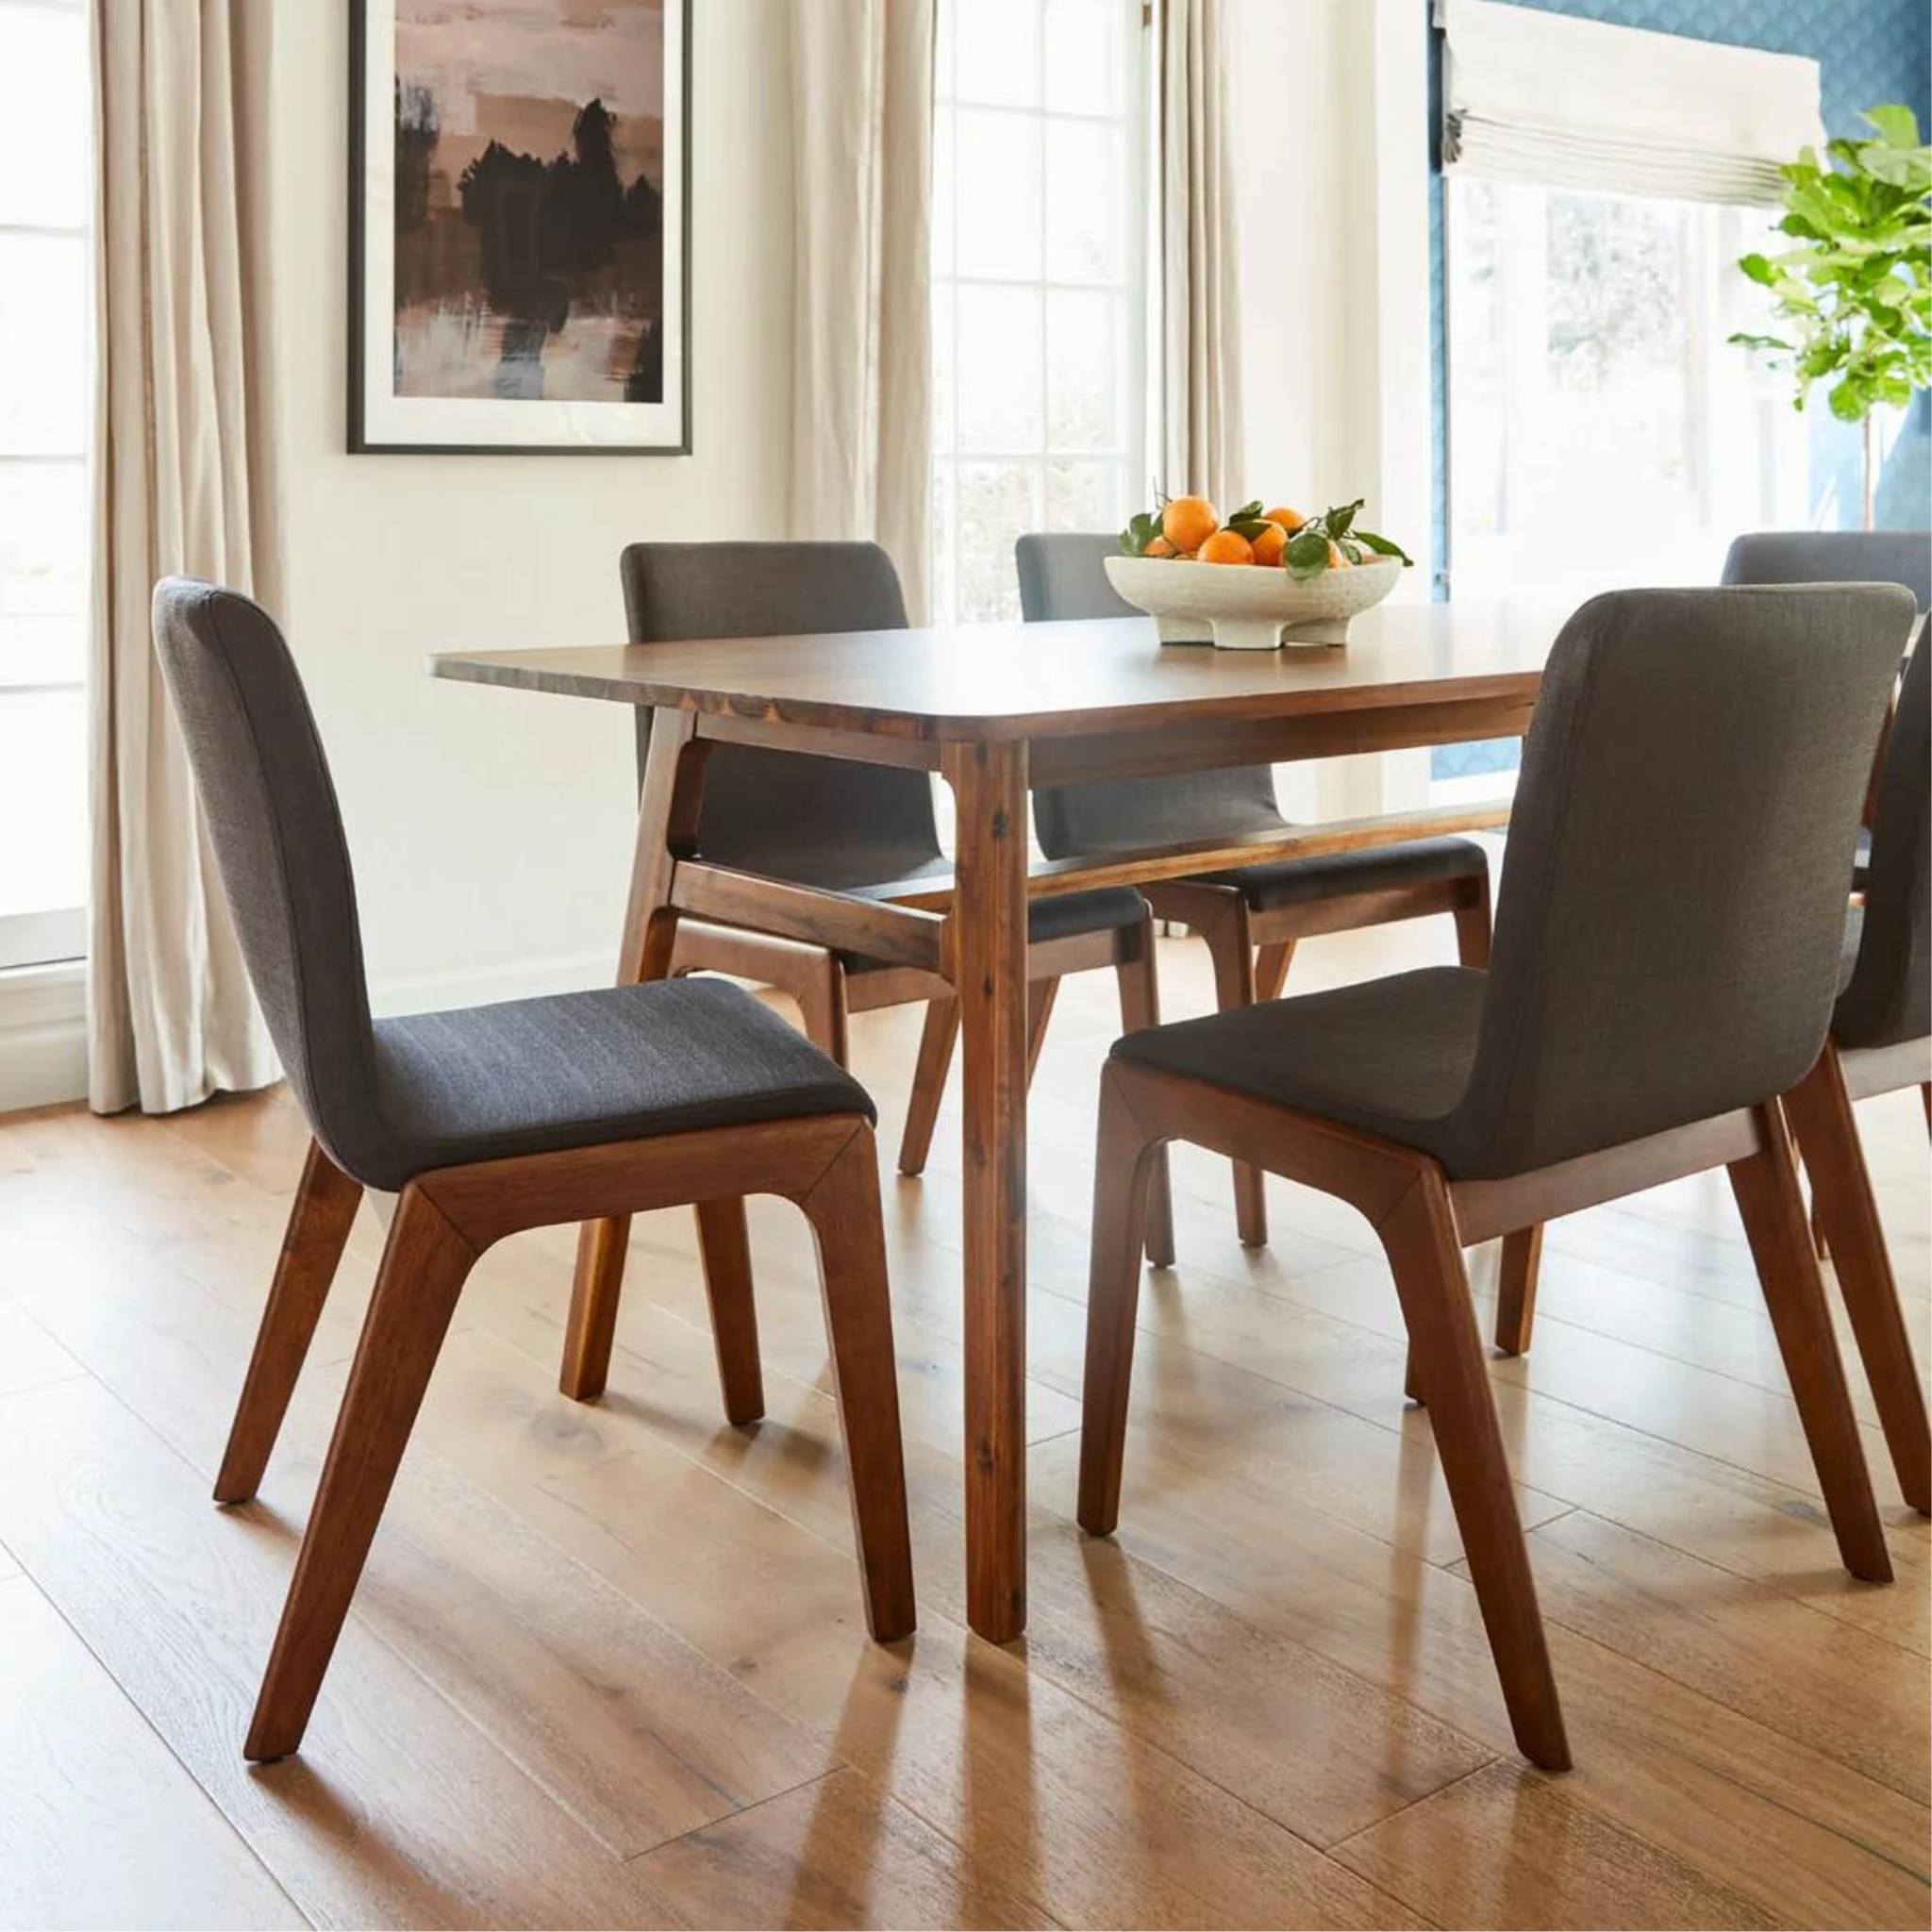 Remi Luxury Round Solid Acacia Wood Dining Table 120cm Seats 6 Scandinavian